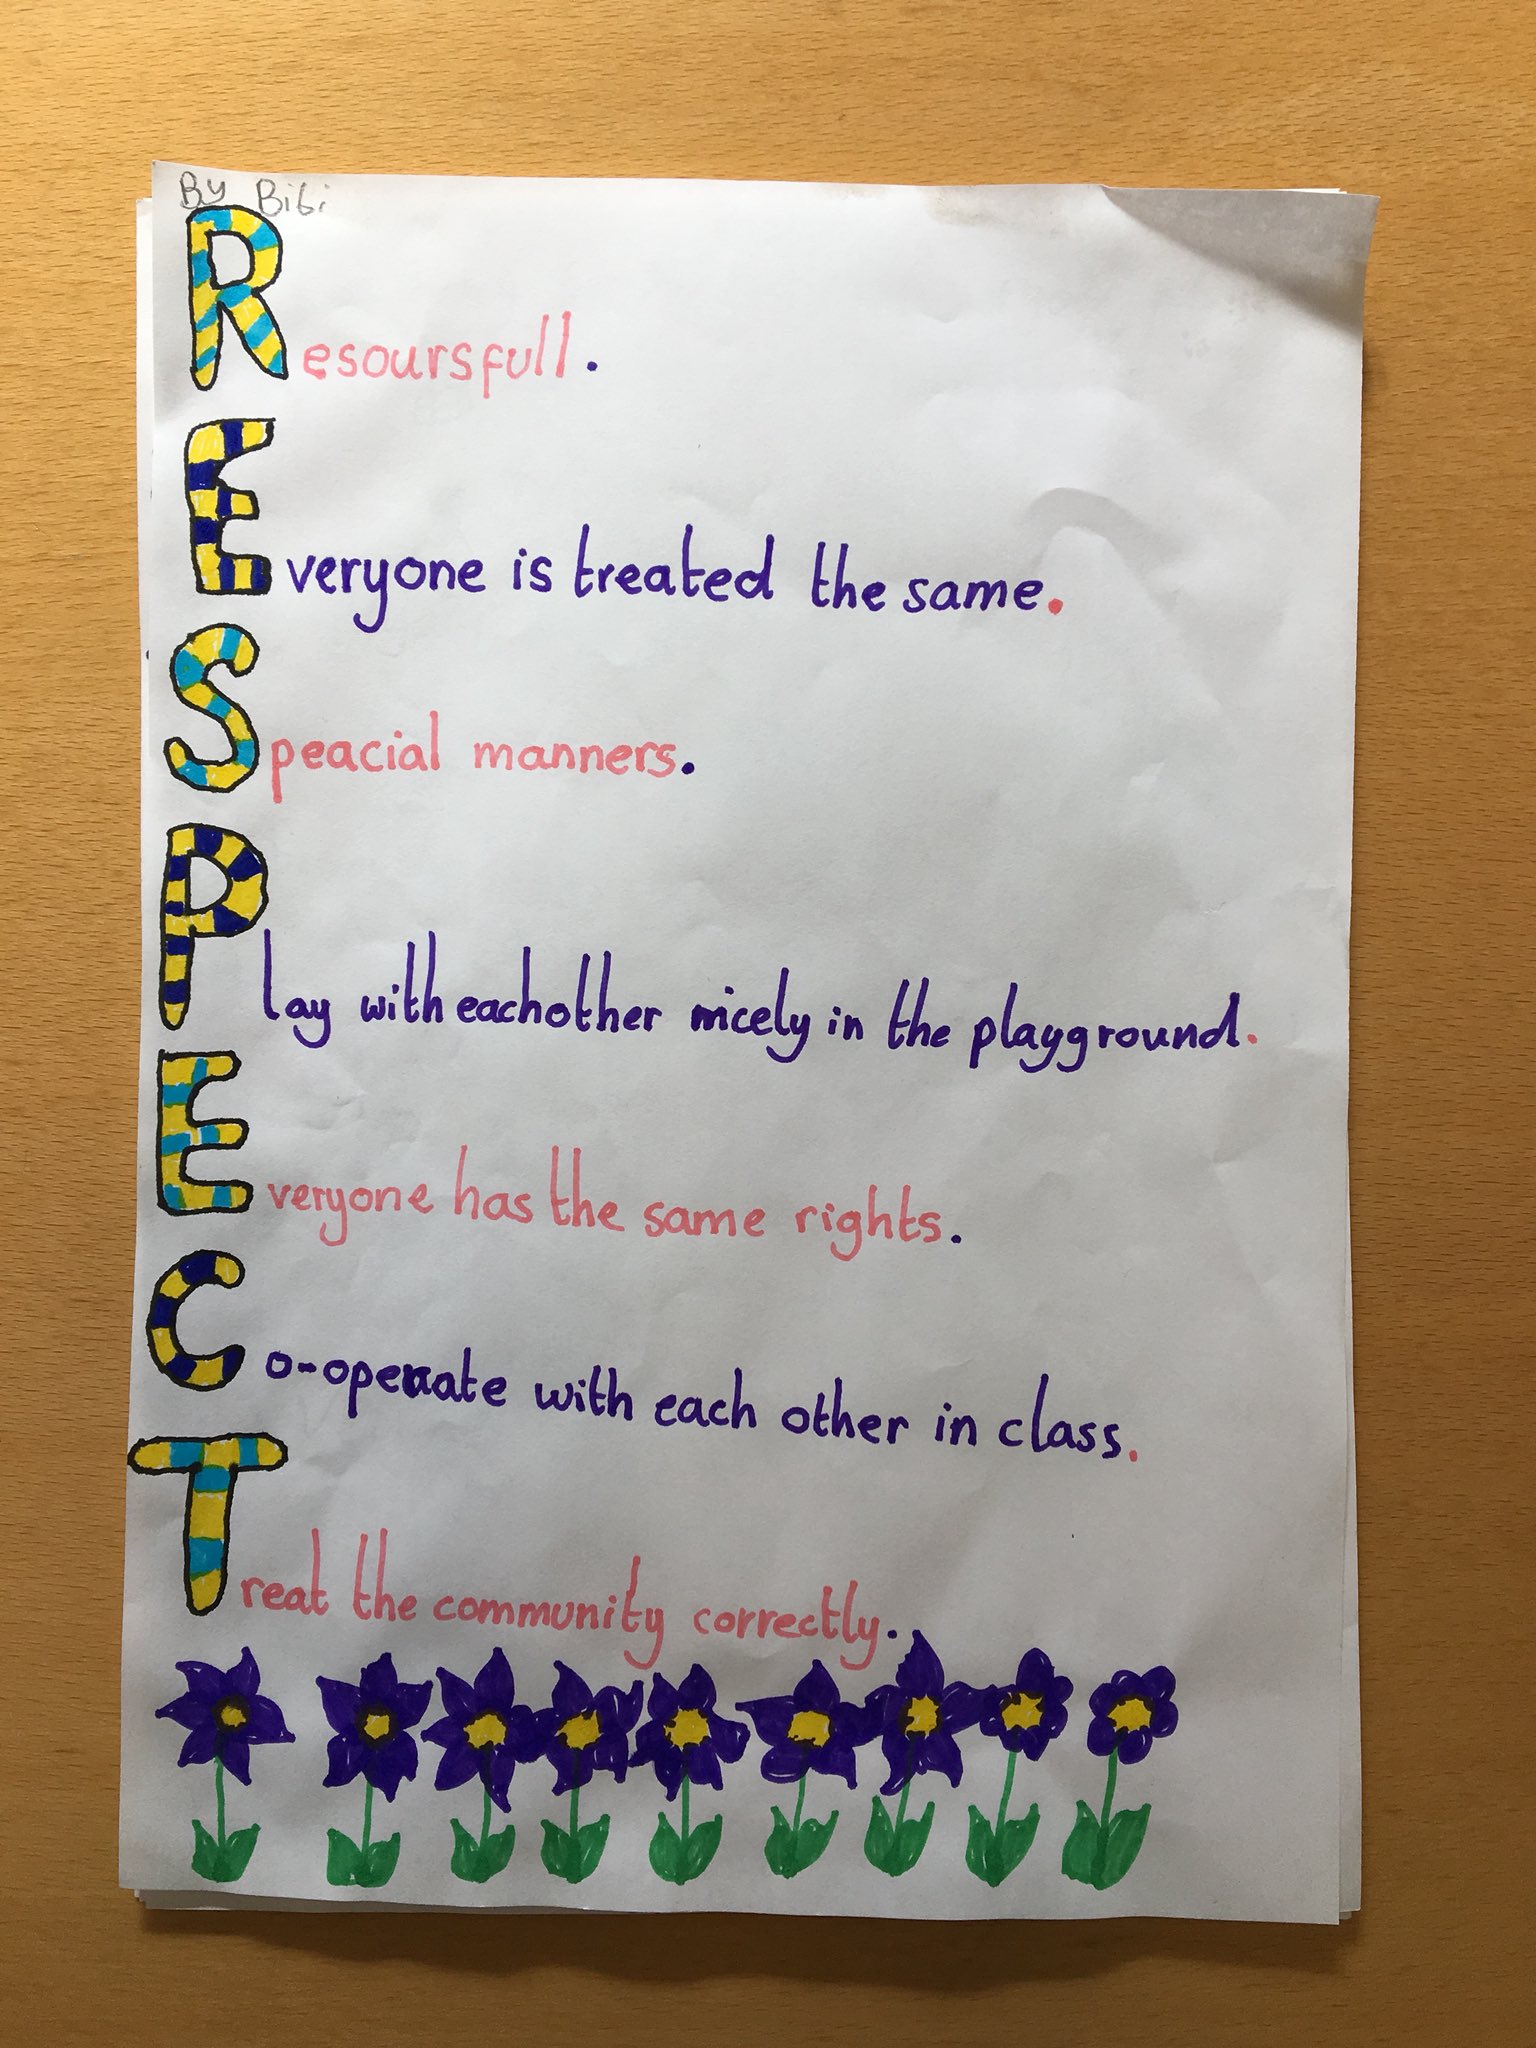 Headteacher@Beecroft on Twitter: "Respect Acrostic Poems: Great to see